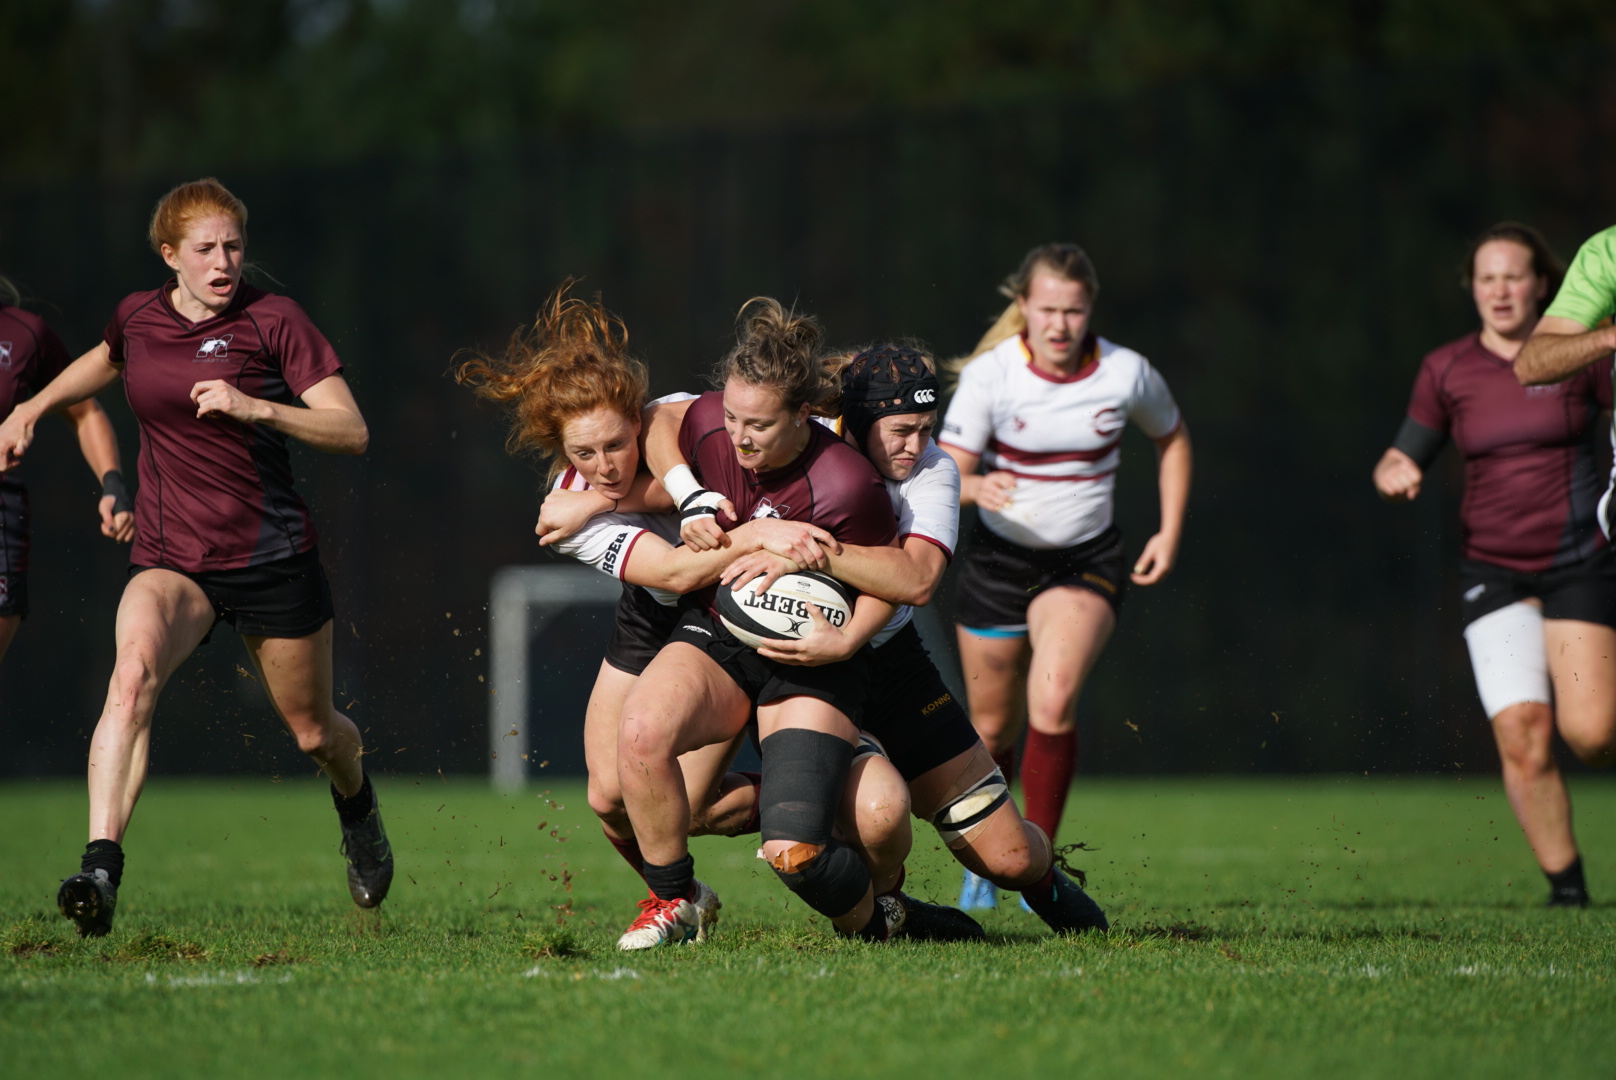 2016 women’s rugby championship 5TH PLACE: Stingers earn fifth place with character victory over Marauders